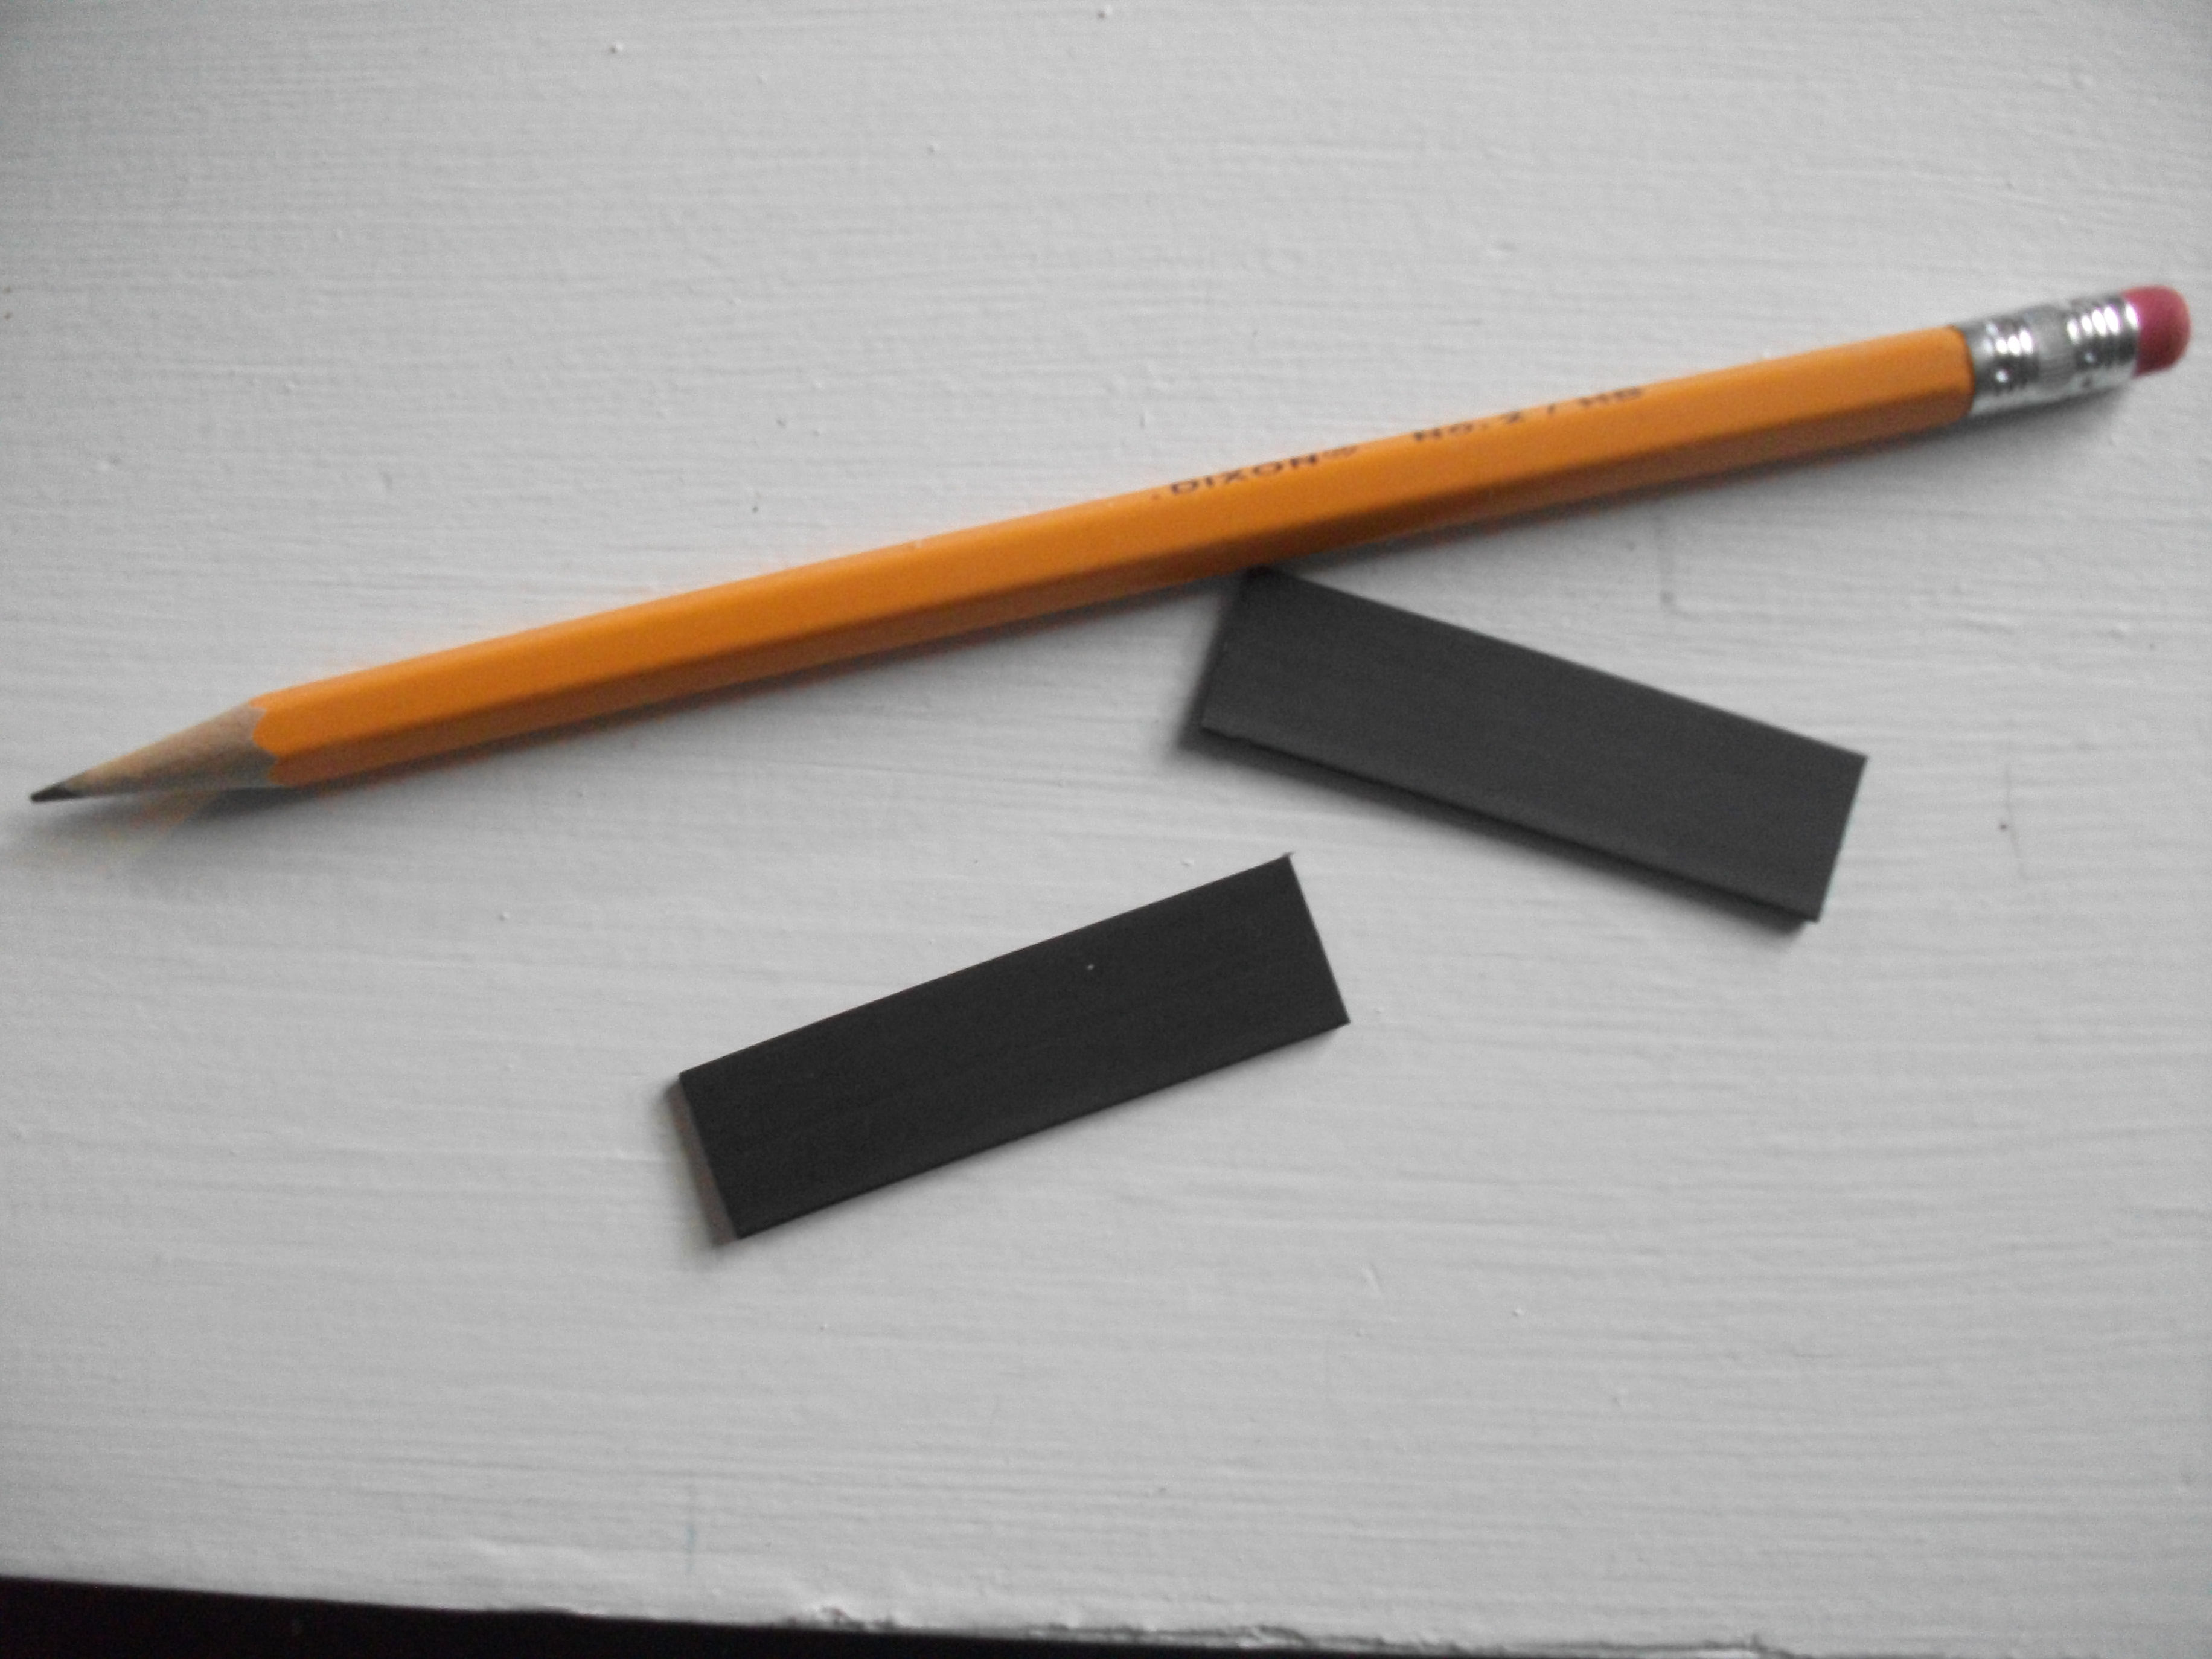 Magnets with pencil